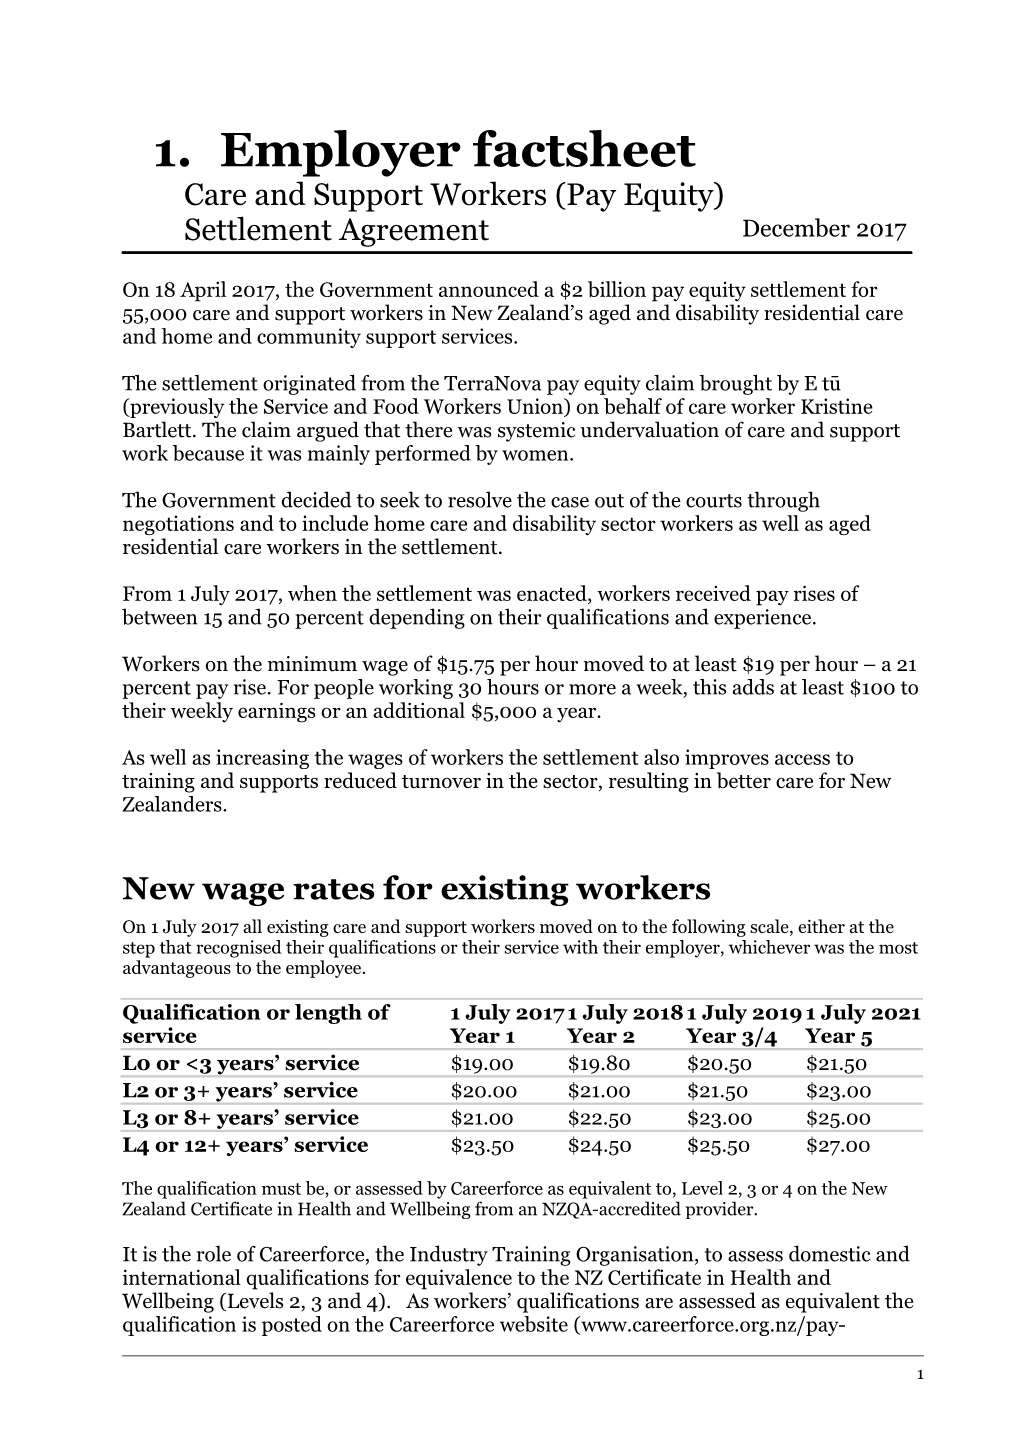 Employer Factsheet Care and Support Workers (Pay Equity) Settlement Agreement - Dec 2017